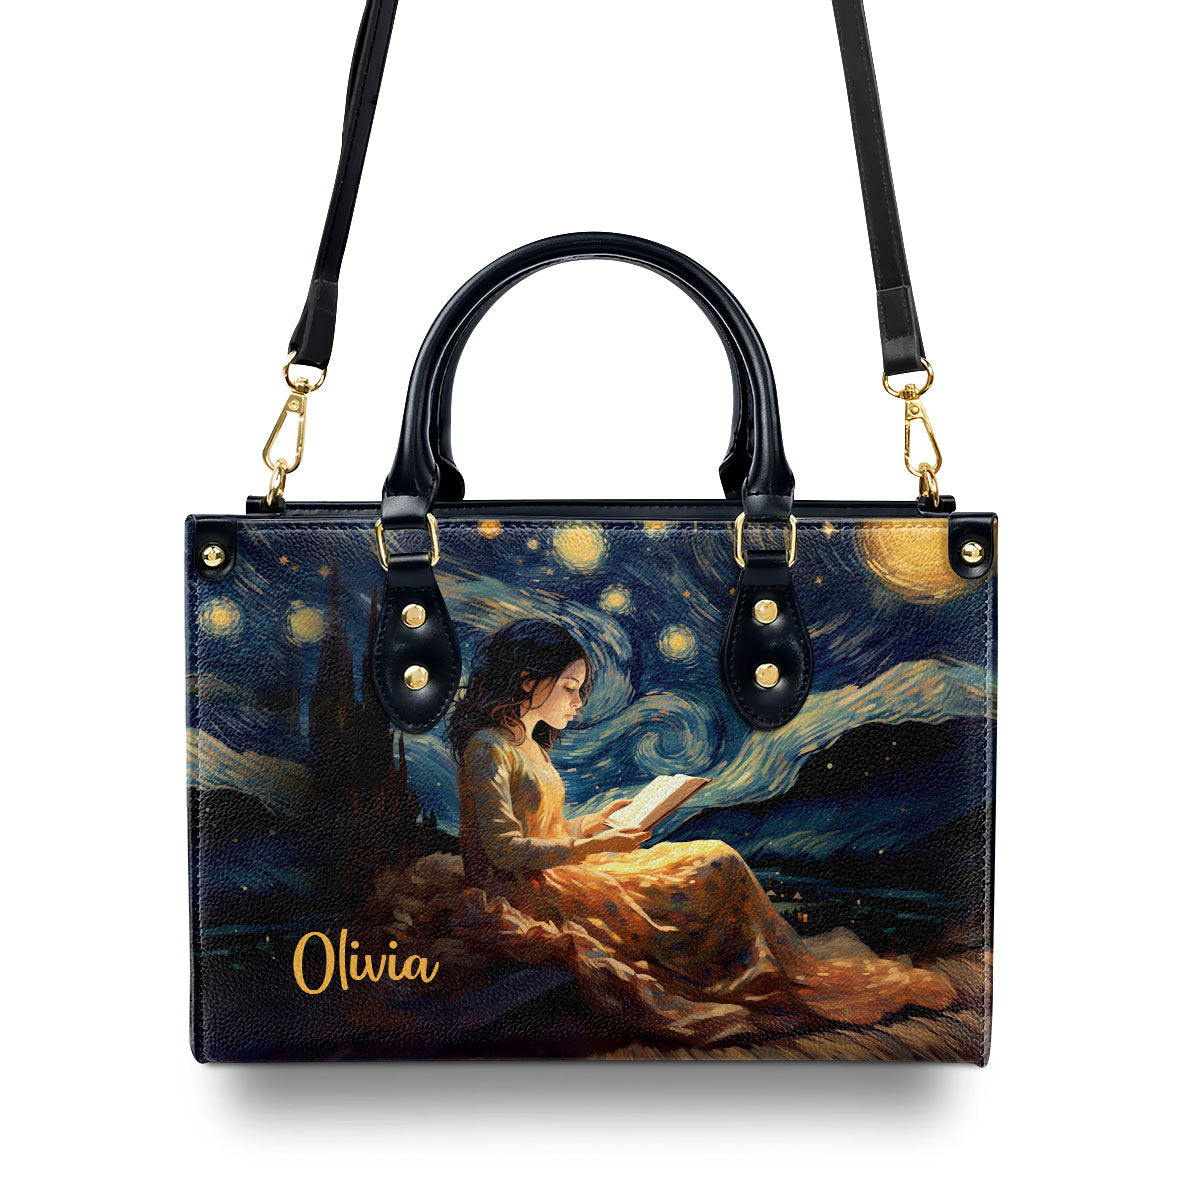 Girl In The Starry Night - Personalized Leather Handbag MS-NH13